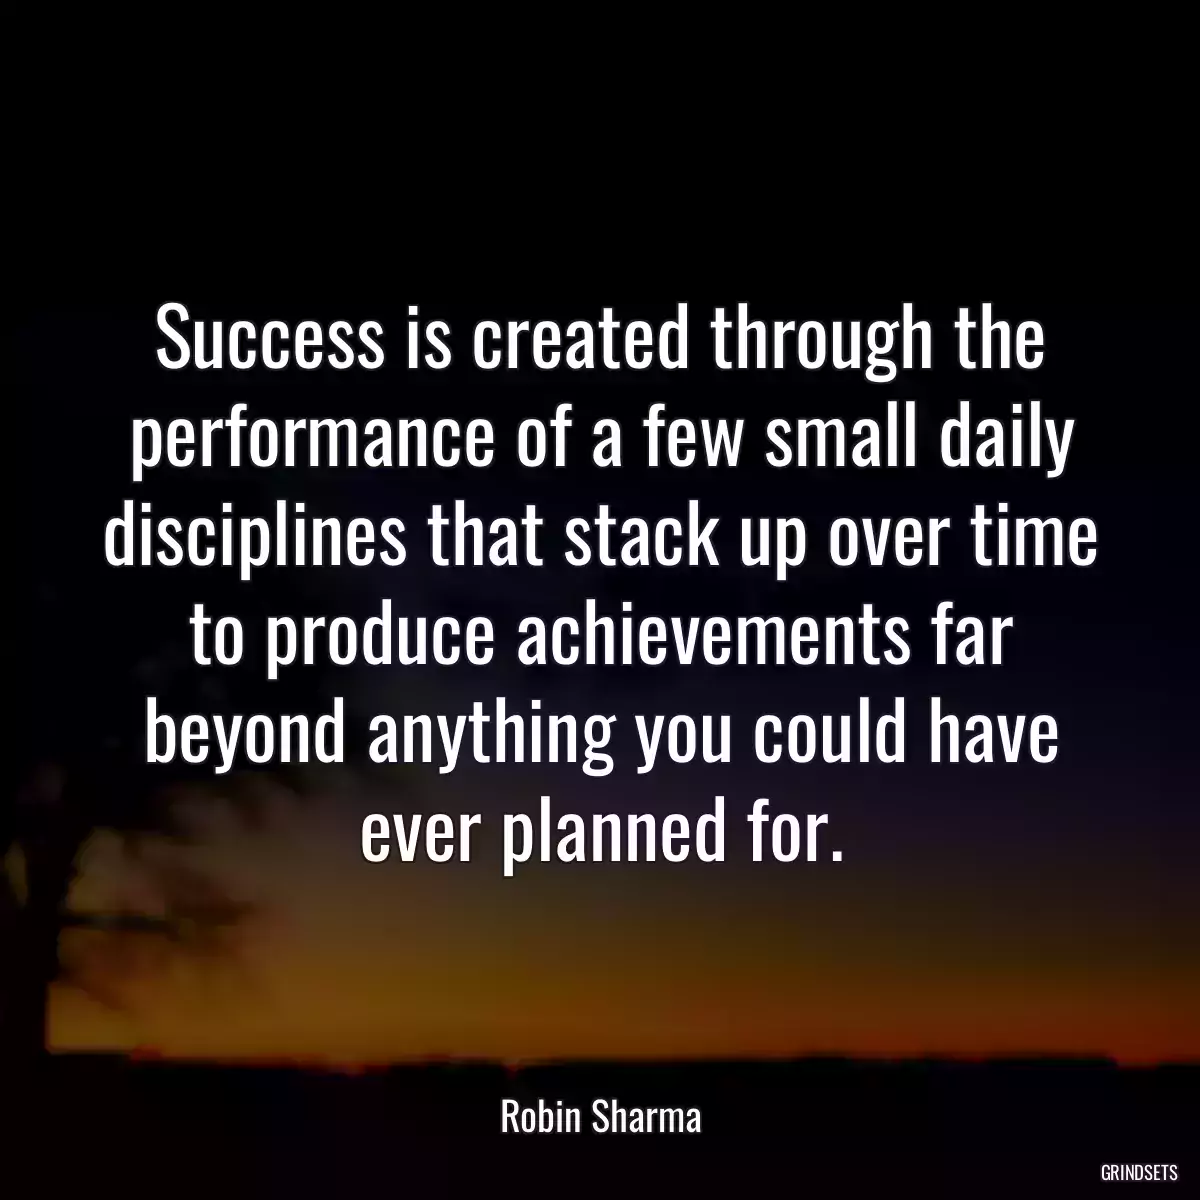 Success is created through the performance of a few small daily disciplines that stack up over time to produce achievements far beyond anything you could have ever planned for.